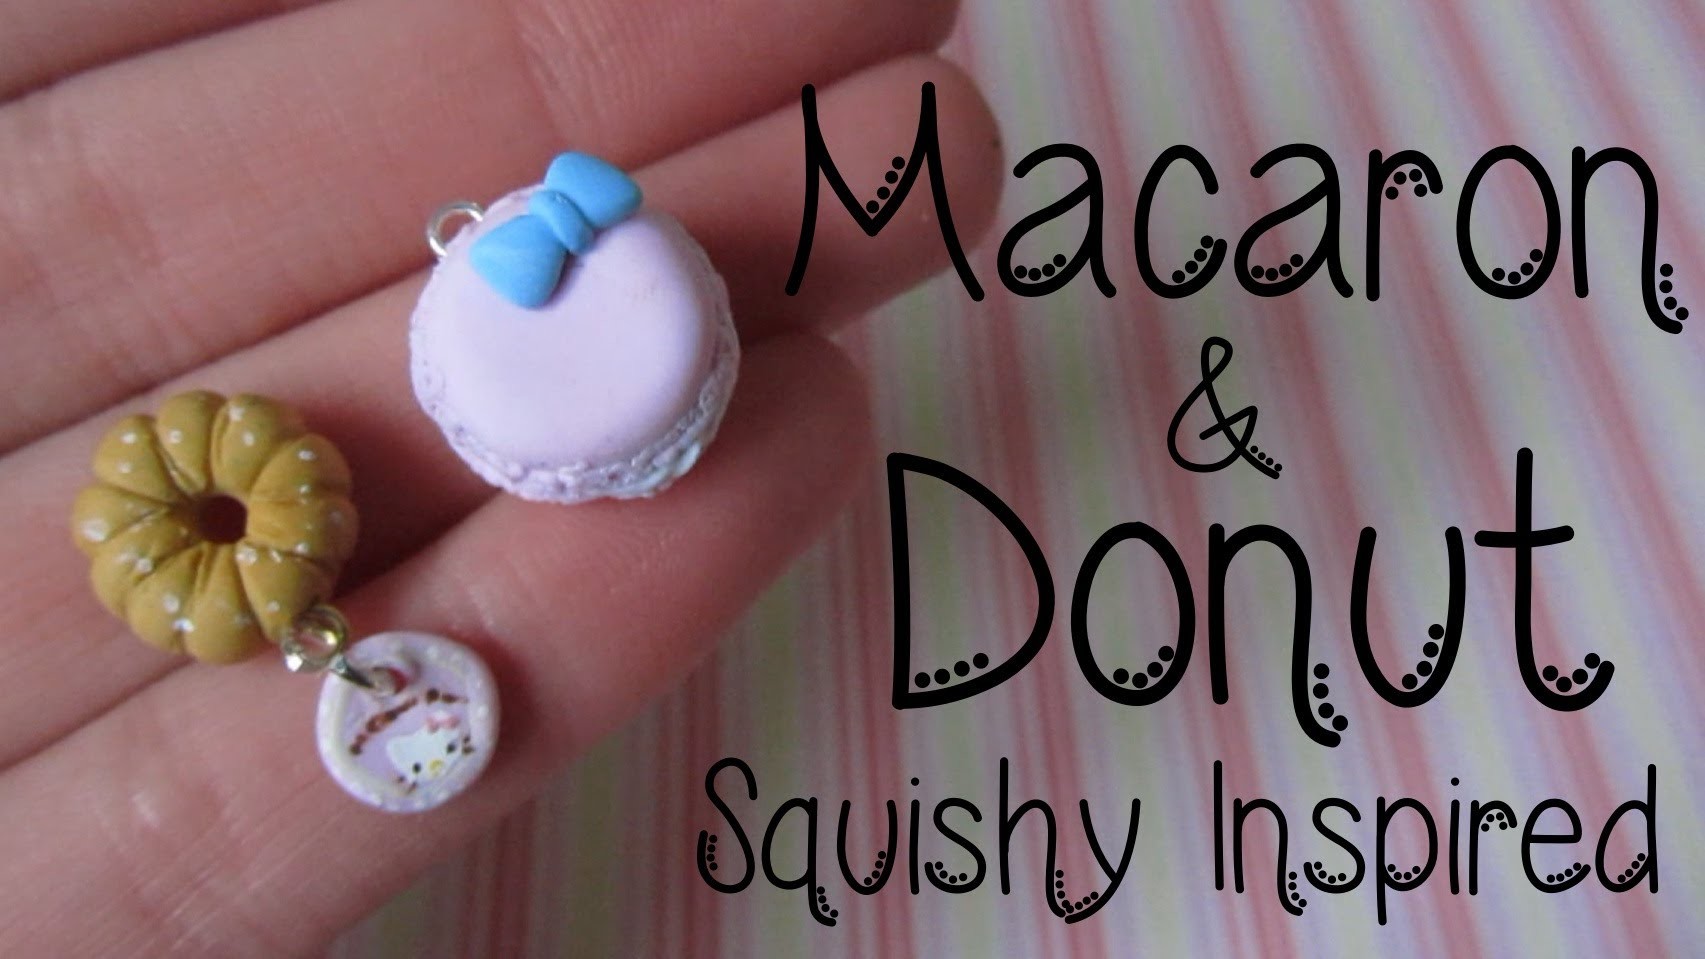 Squishy Inspired Donut & Macaron Tutorial: Hello Kitty Donut: Polymer Clay How-to.